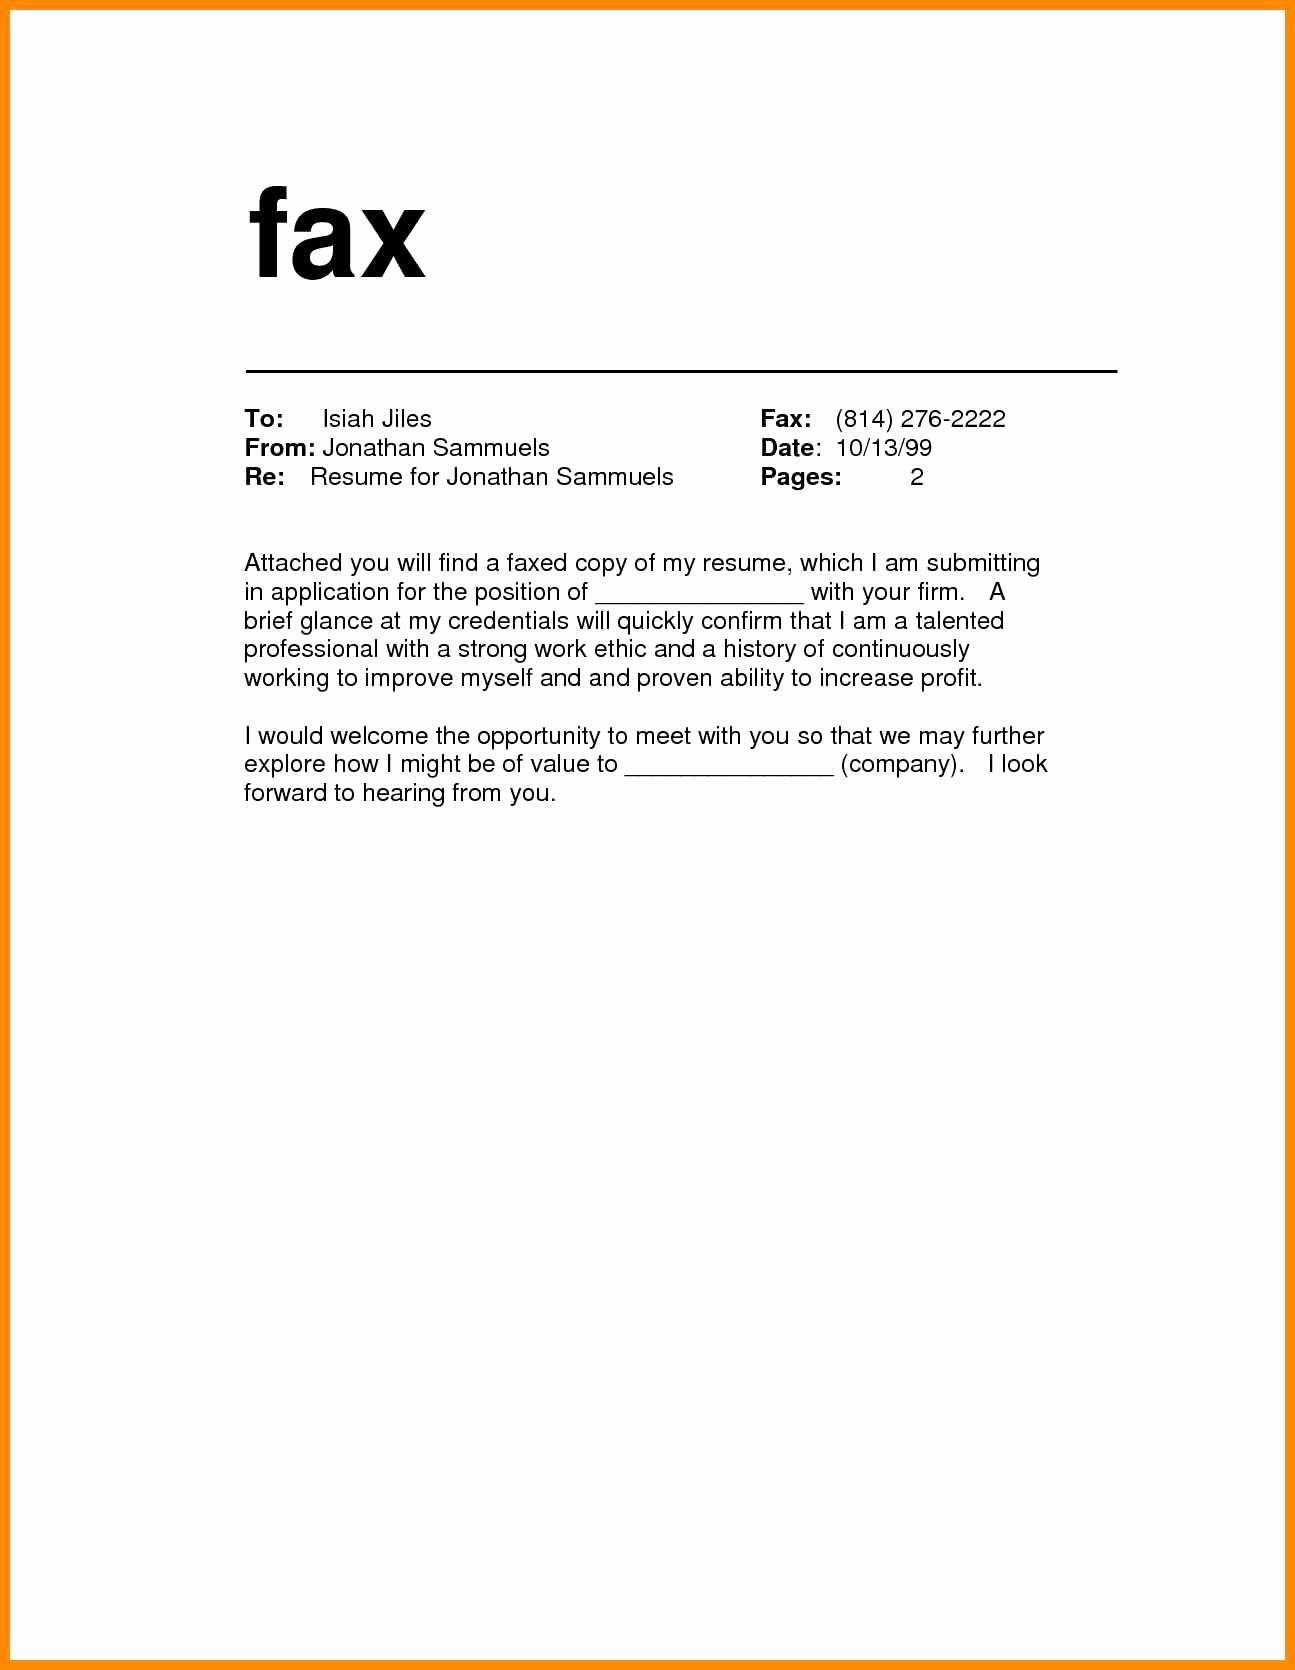 Cover Page for Resume Template Fresh Printable Fax Fax Cover Sheet for Resume Beautiful How to